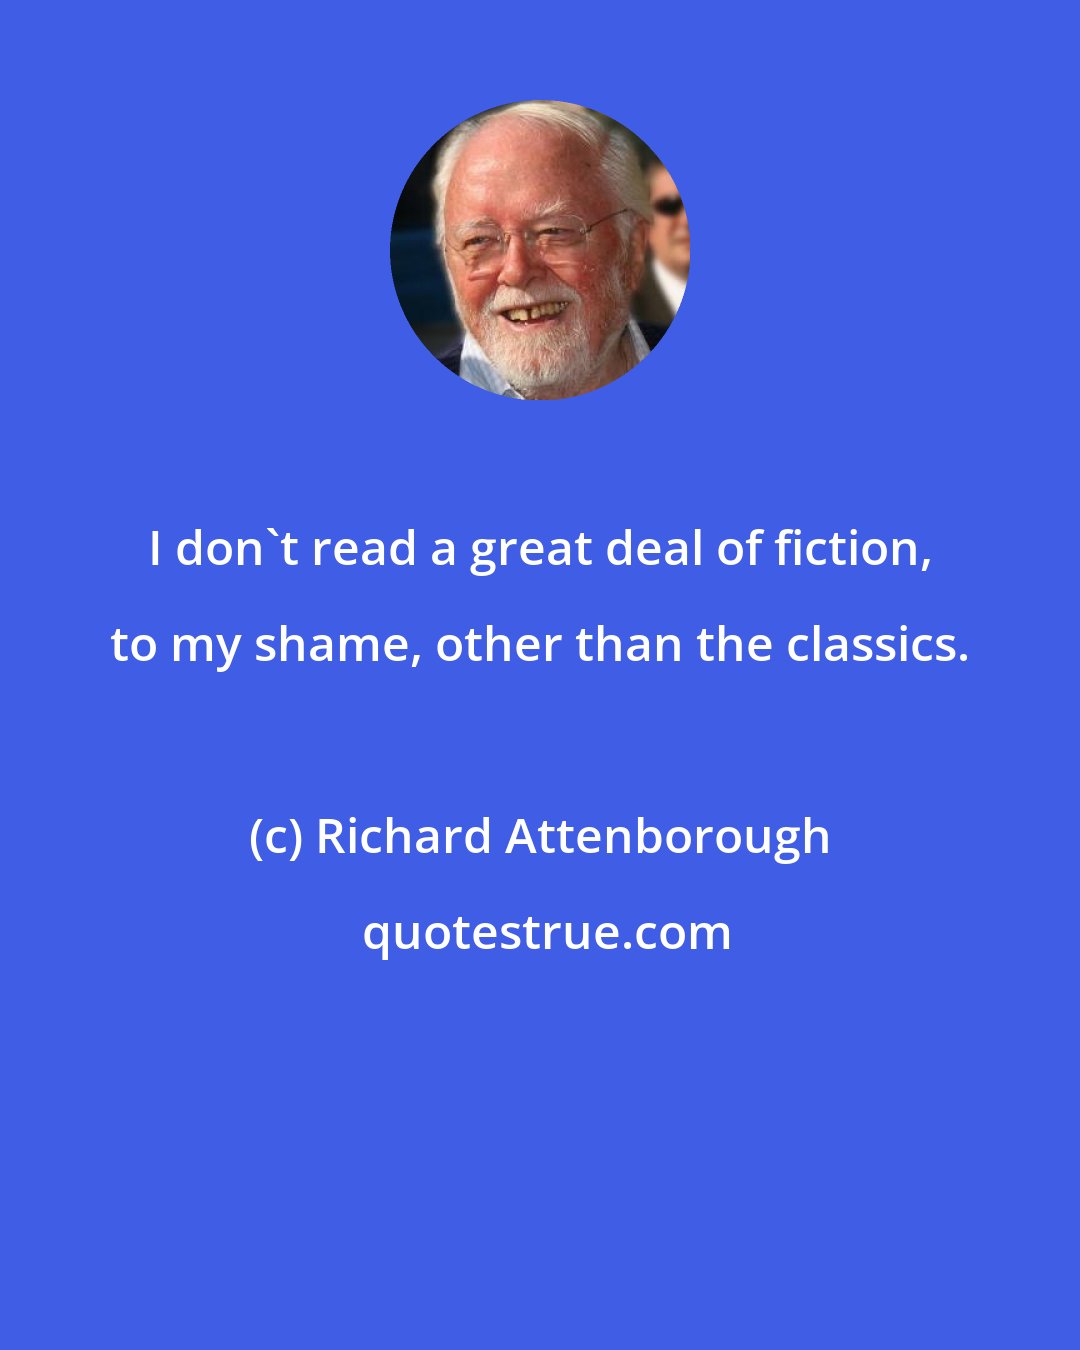 Richard Attenborough: I don't read a great deal of fiction, to my shame, other than the classics.